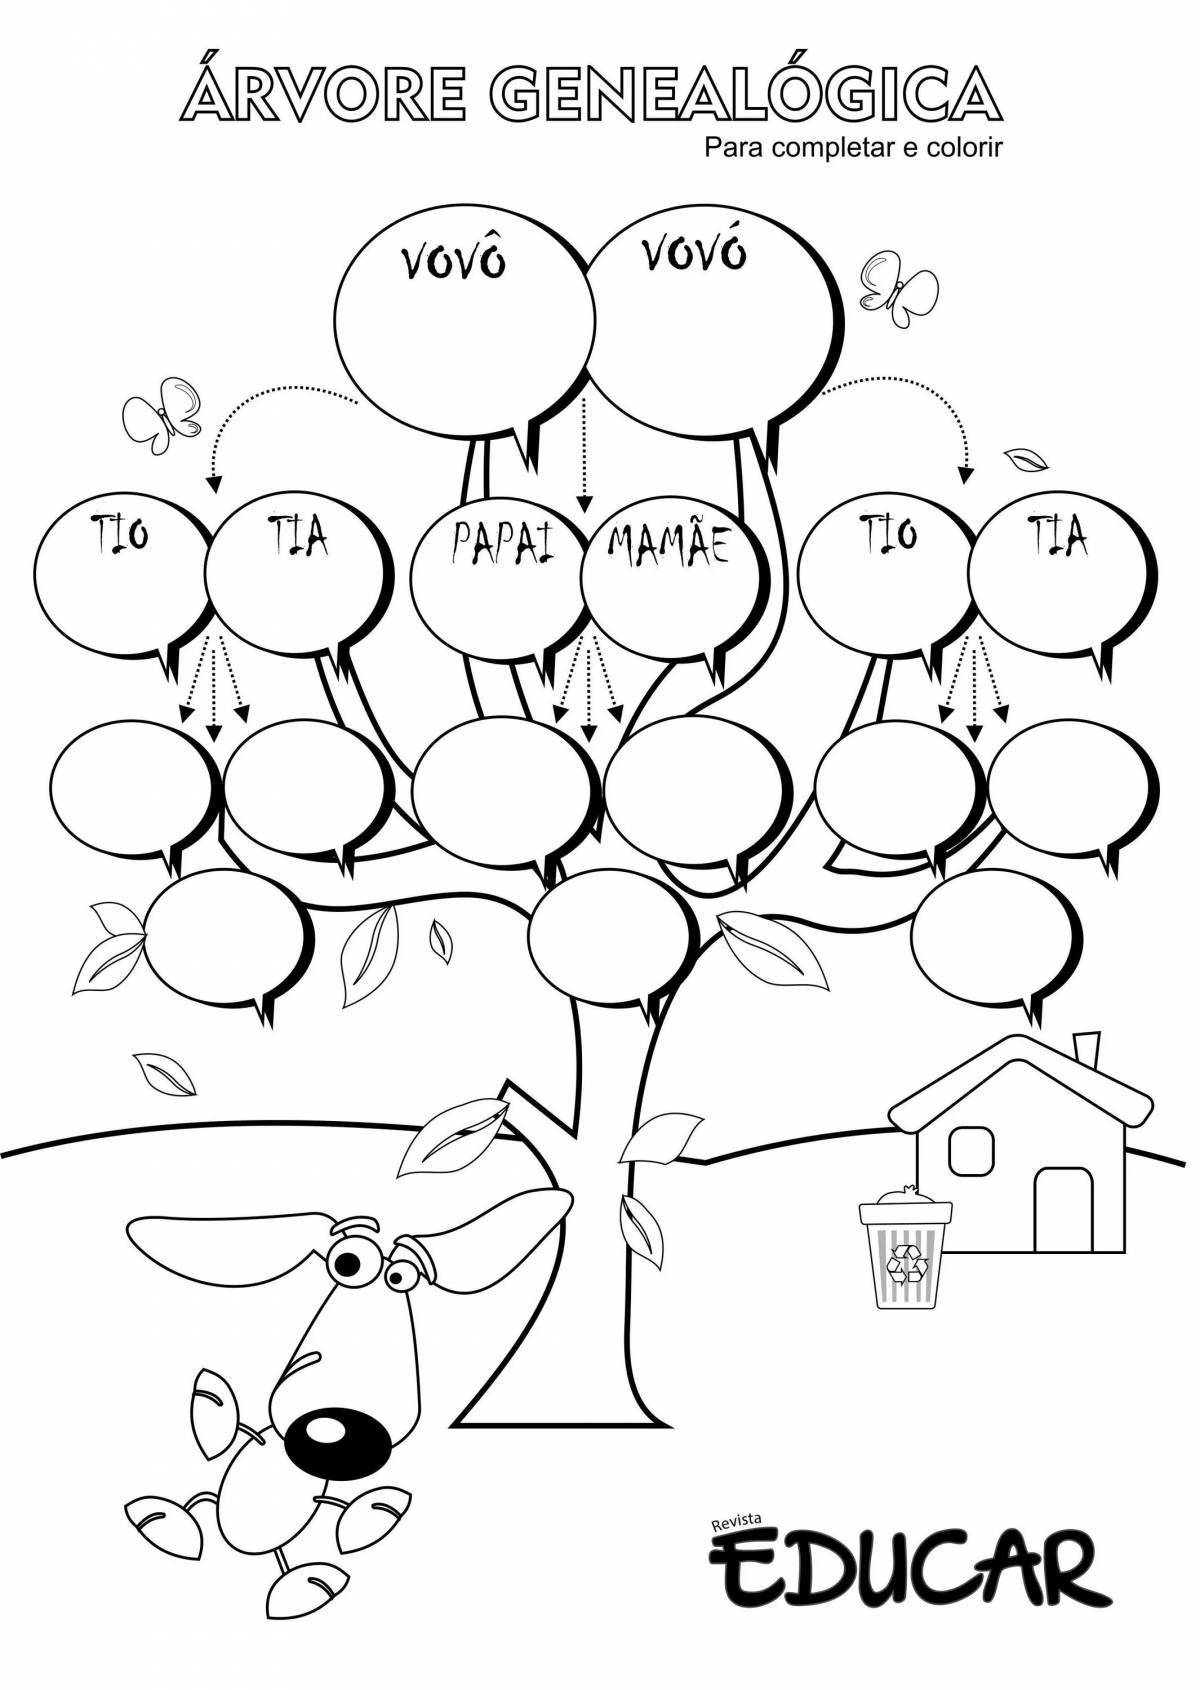 Dazzling family tree coloring page